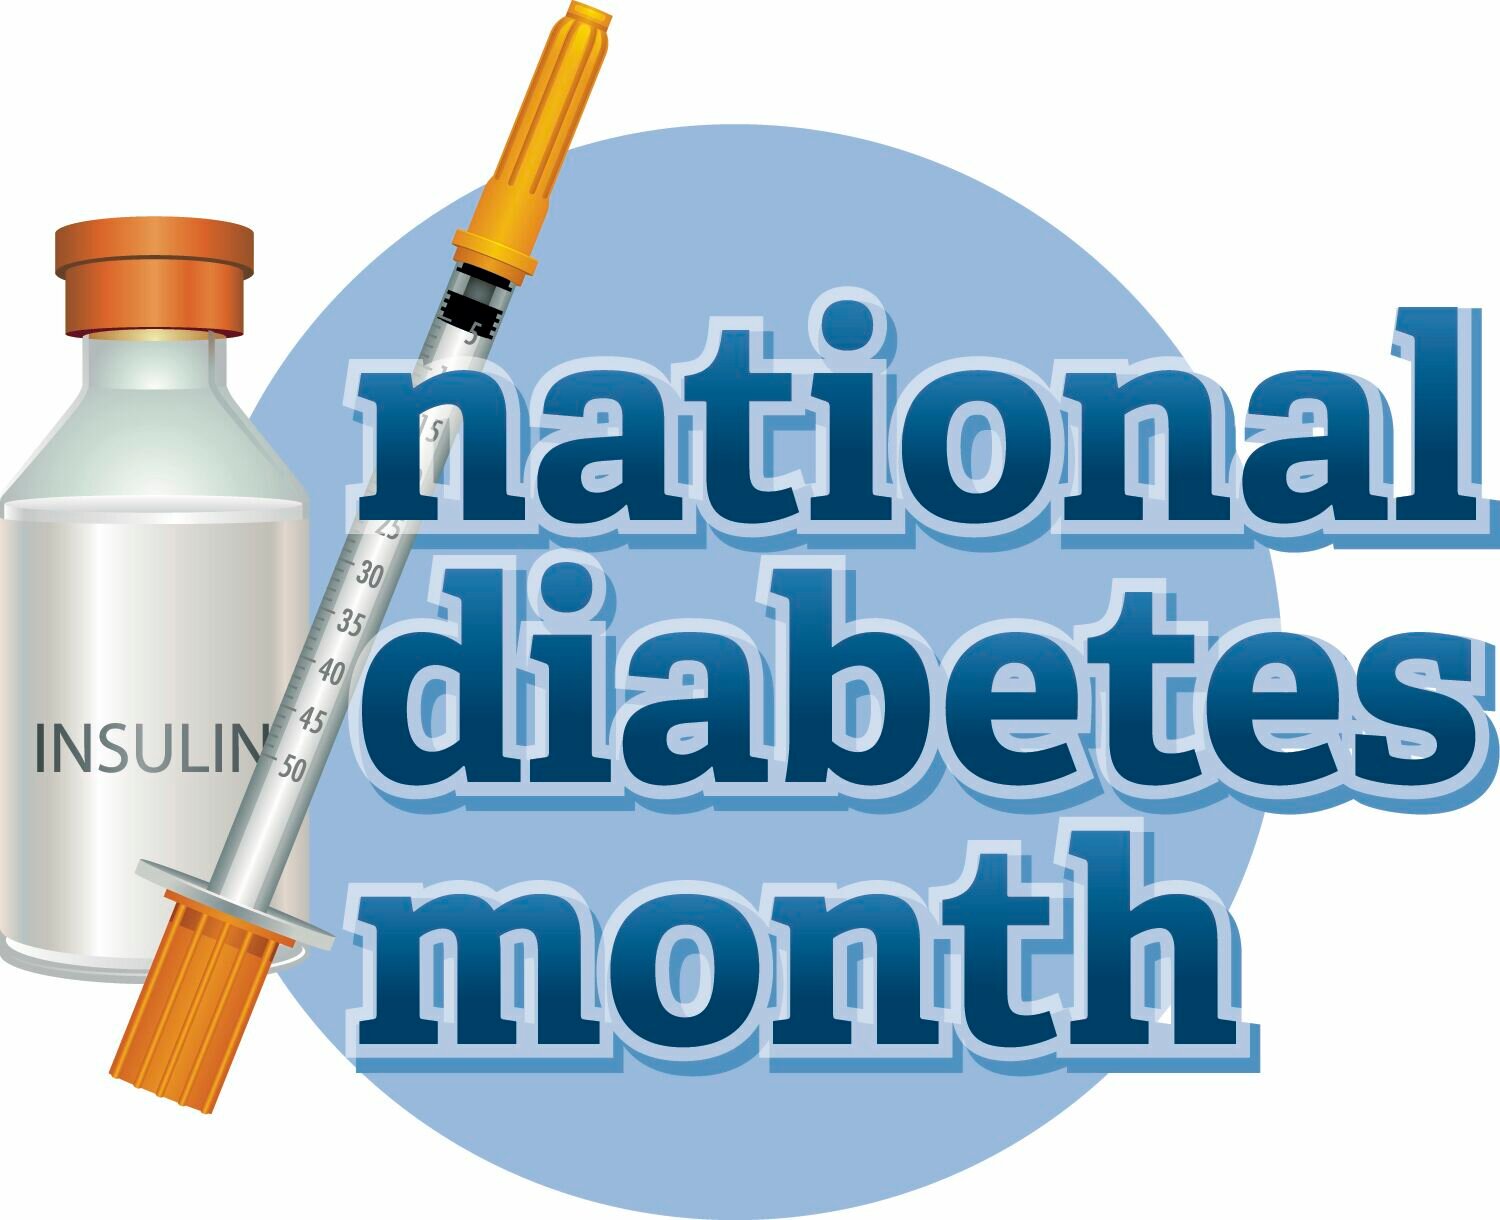 PUBLIC HEALTH CORNER National Diabetes Month provides opportunity to